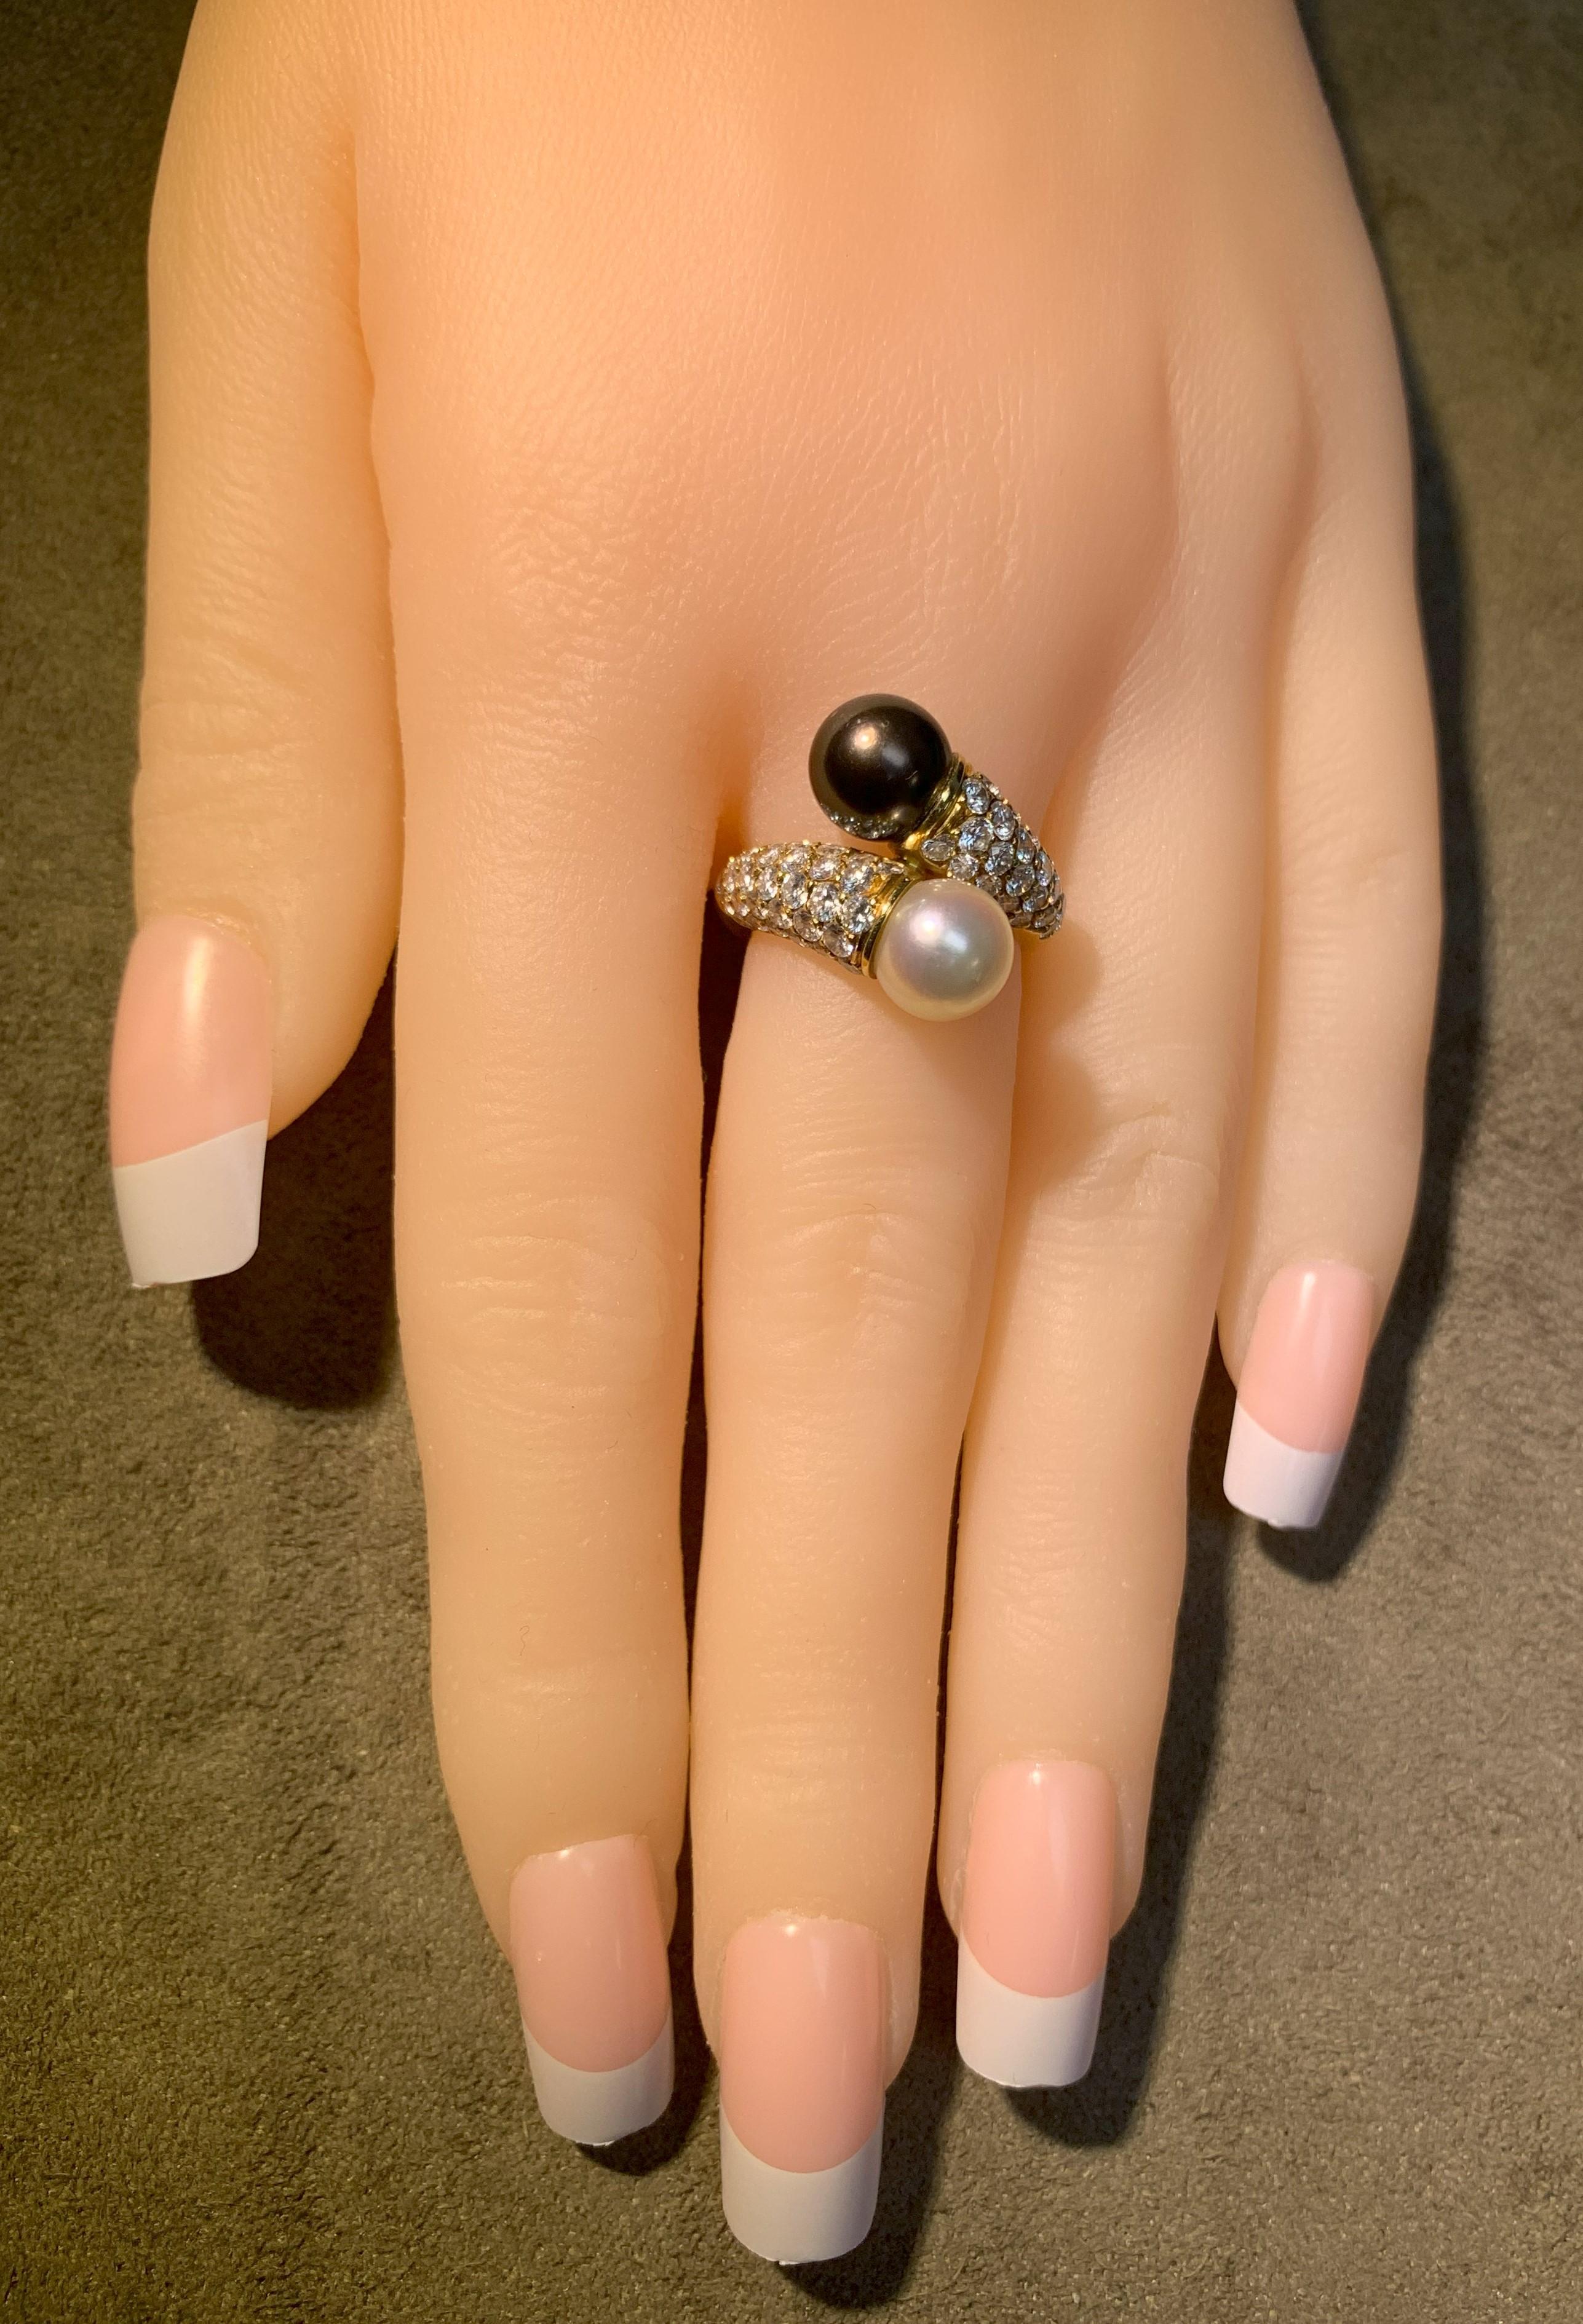 Van Cleef & Arpels Toi Et Moi Pearl Ring with Diamonds, 18k For Sale 4